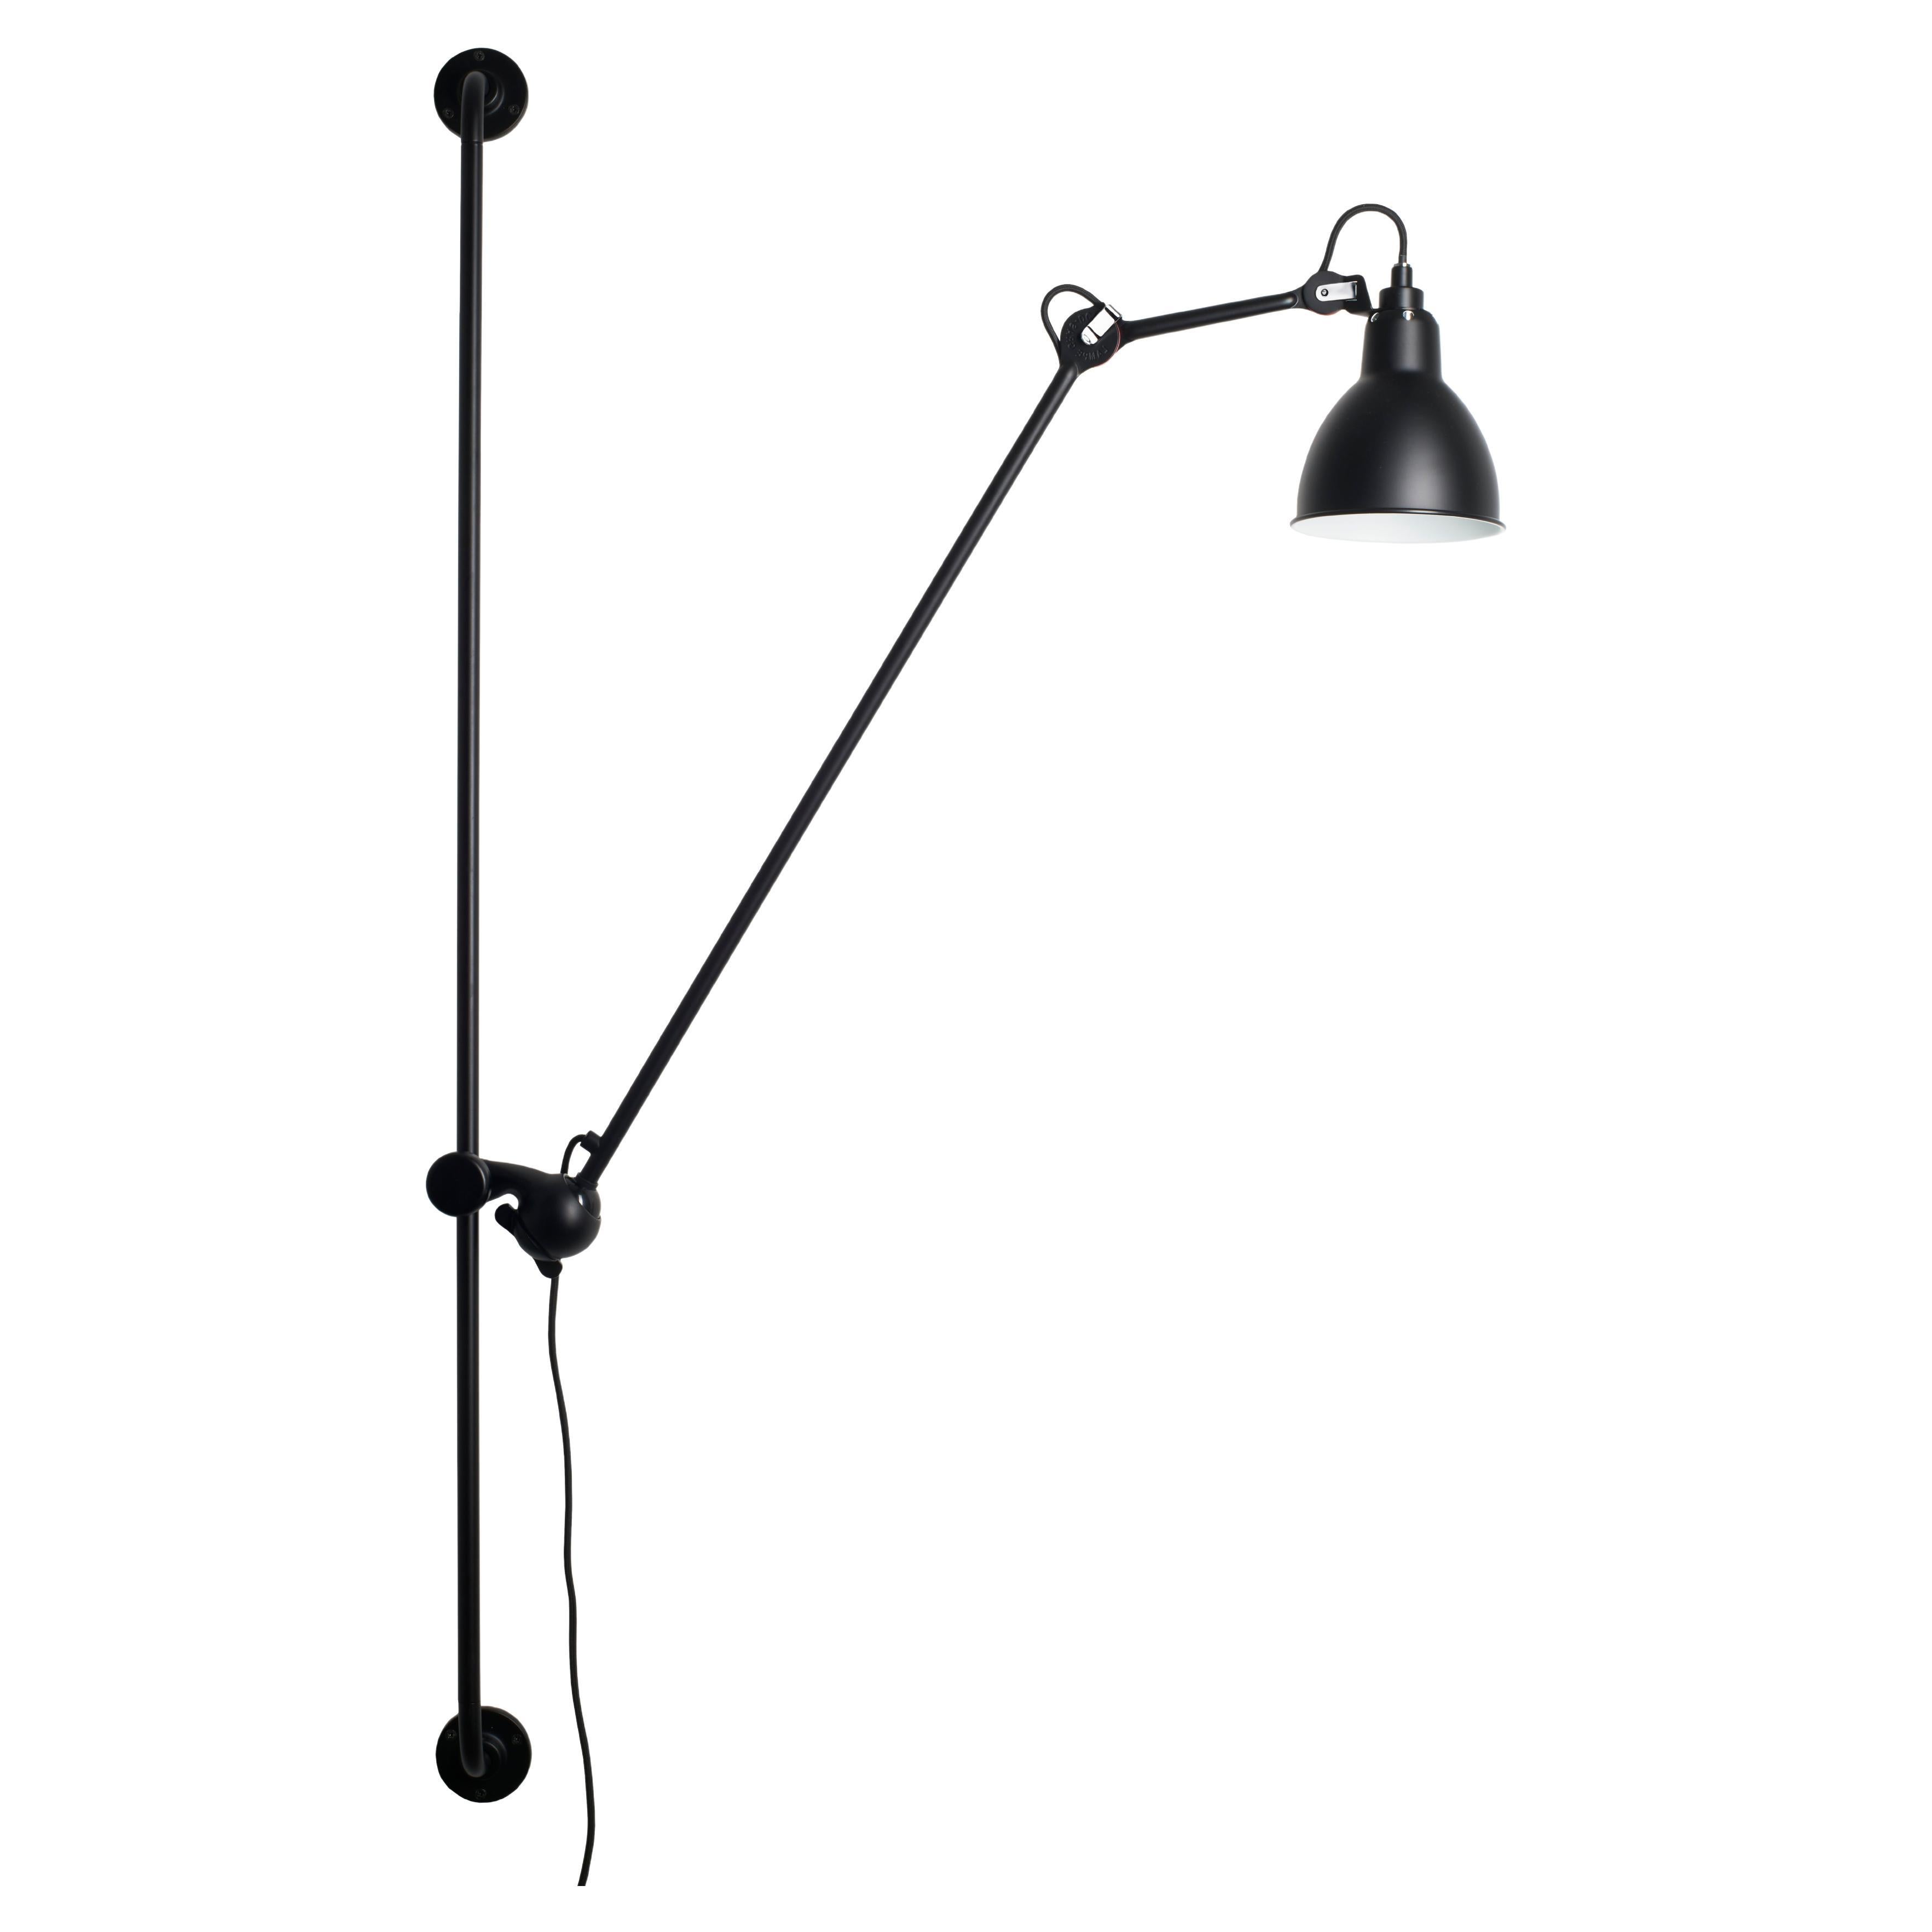 DCW Editions La Lampe Gras N°214 Round Wall Lamp in Black Arm and Shade For Sale